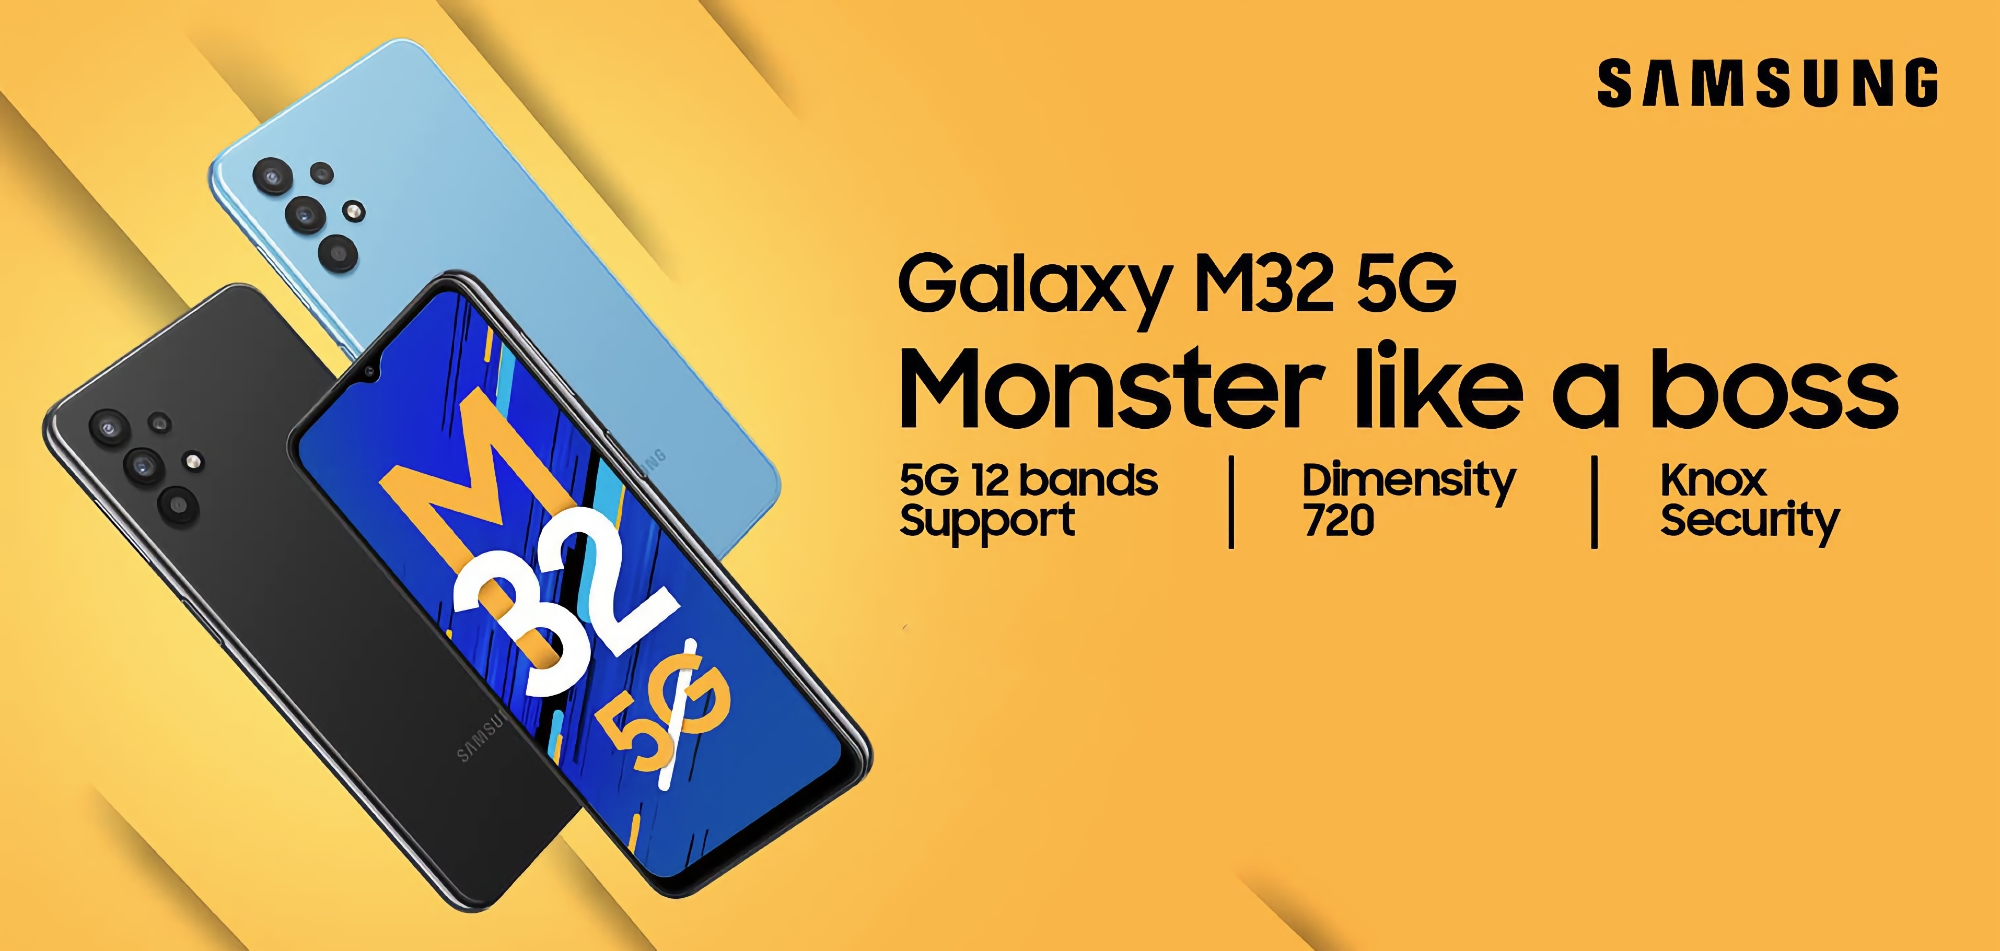 Samsung announced the Galaxy M32 5G: replica of Galaxy A32 5G with MediaTek Dimensity 720 chip, 5000 mAh battery and a price starting from $282